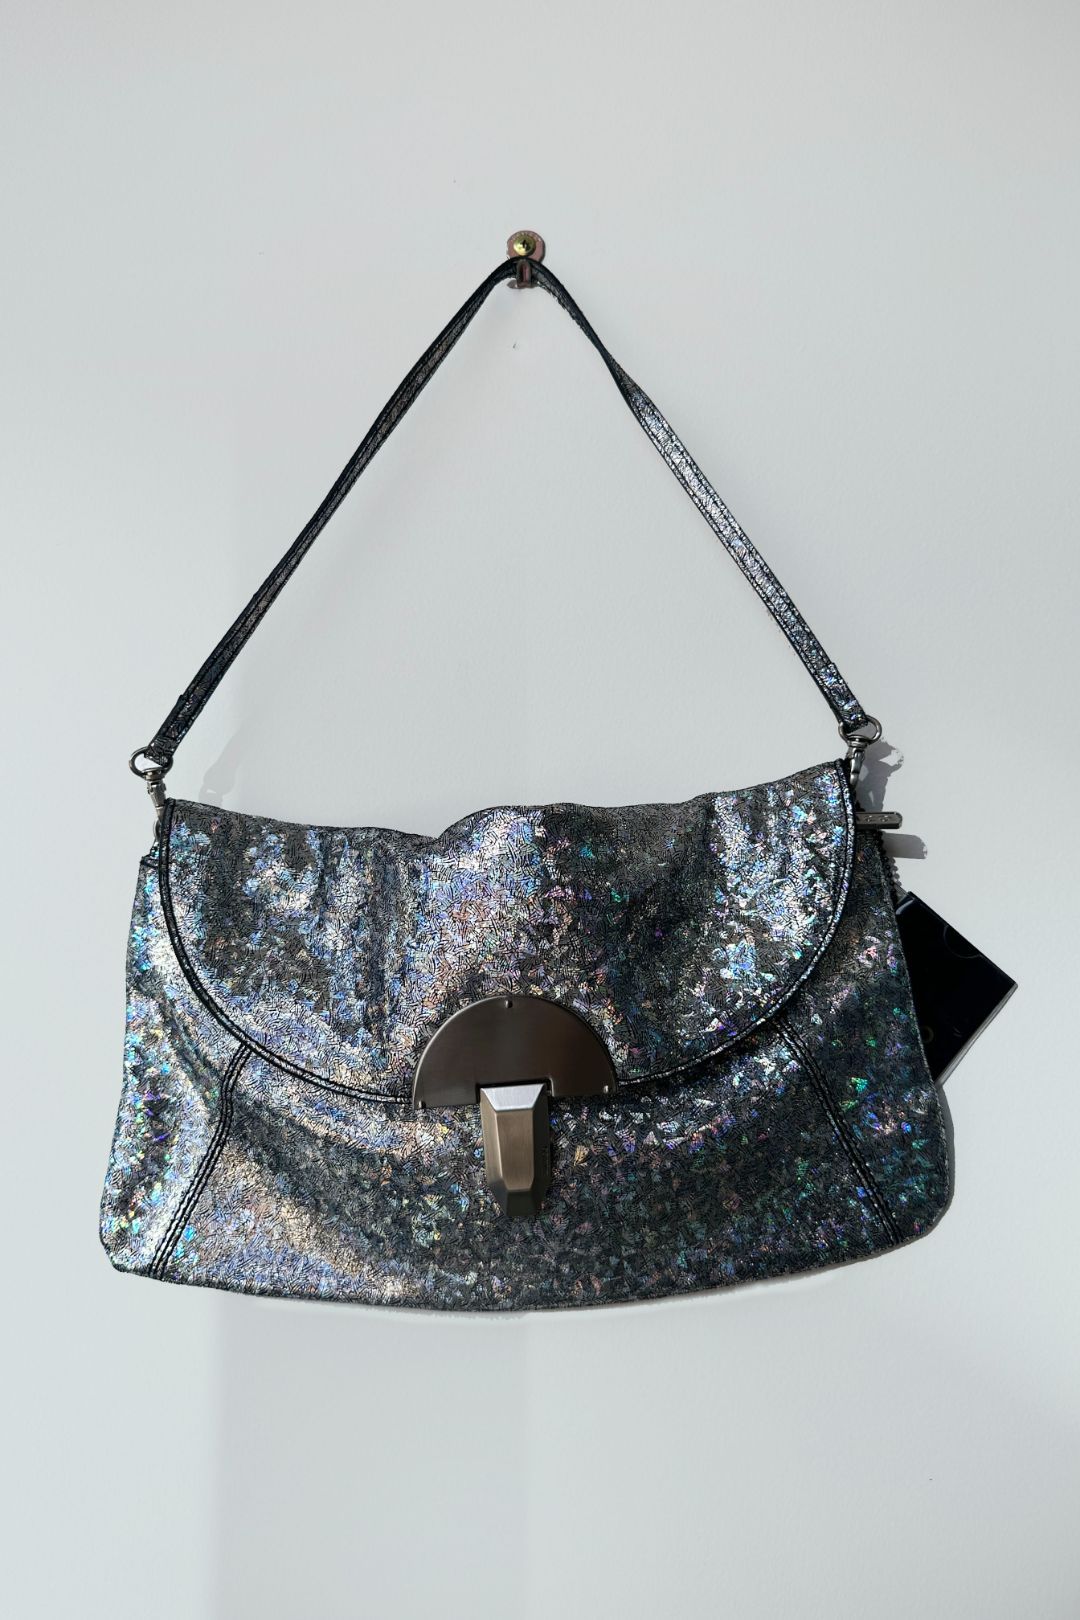 Mimco Holographic Clutch Bag with Strap